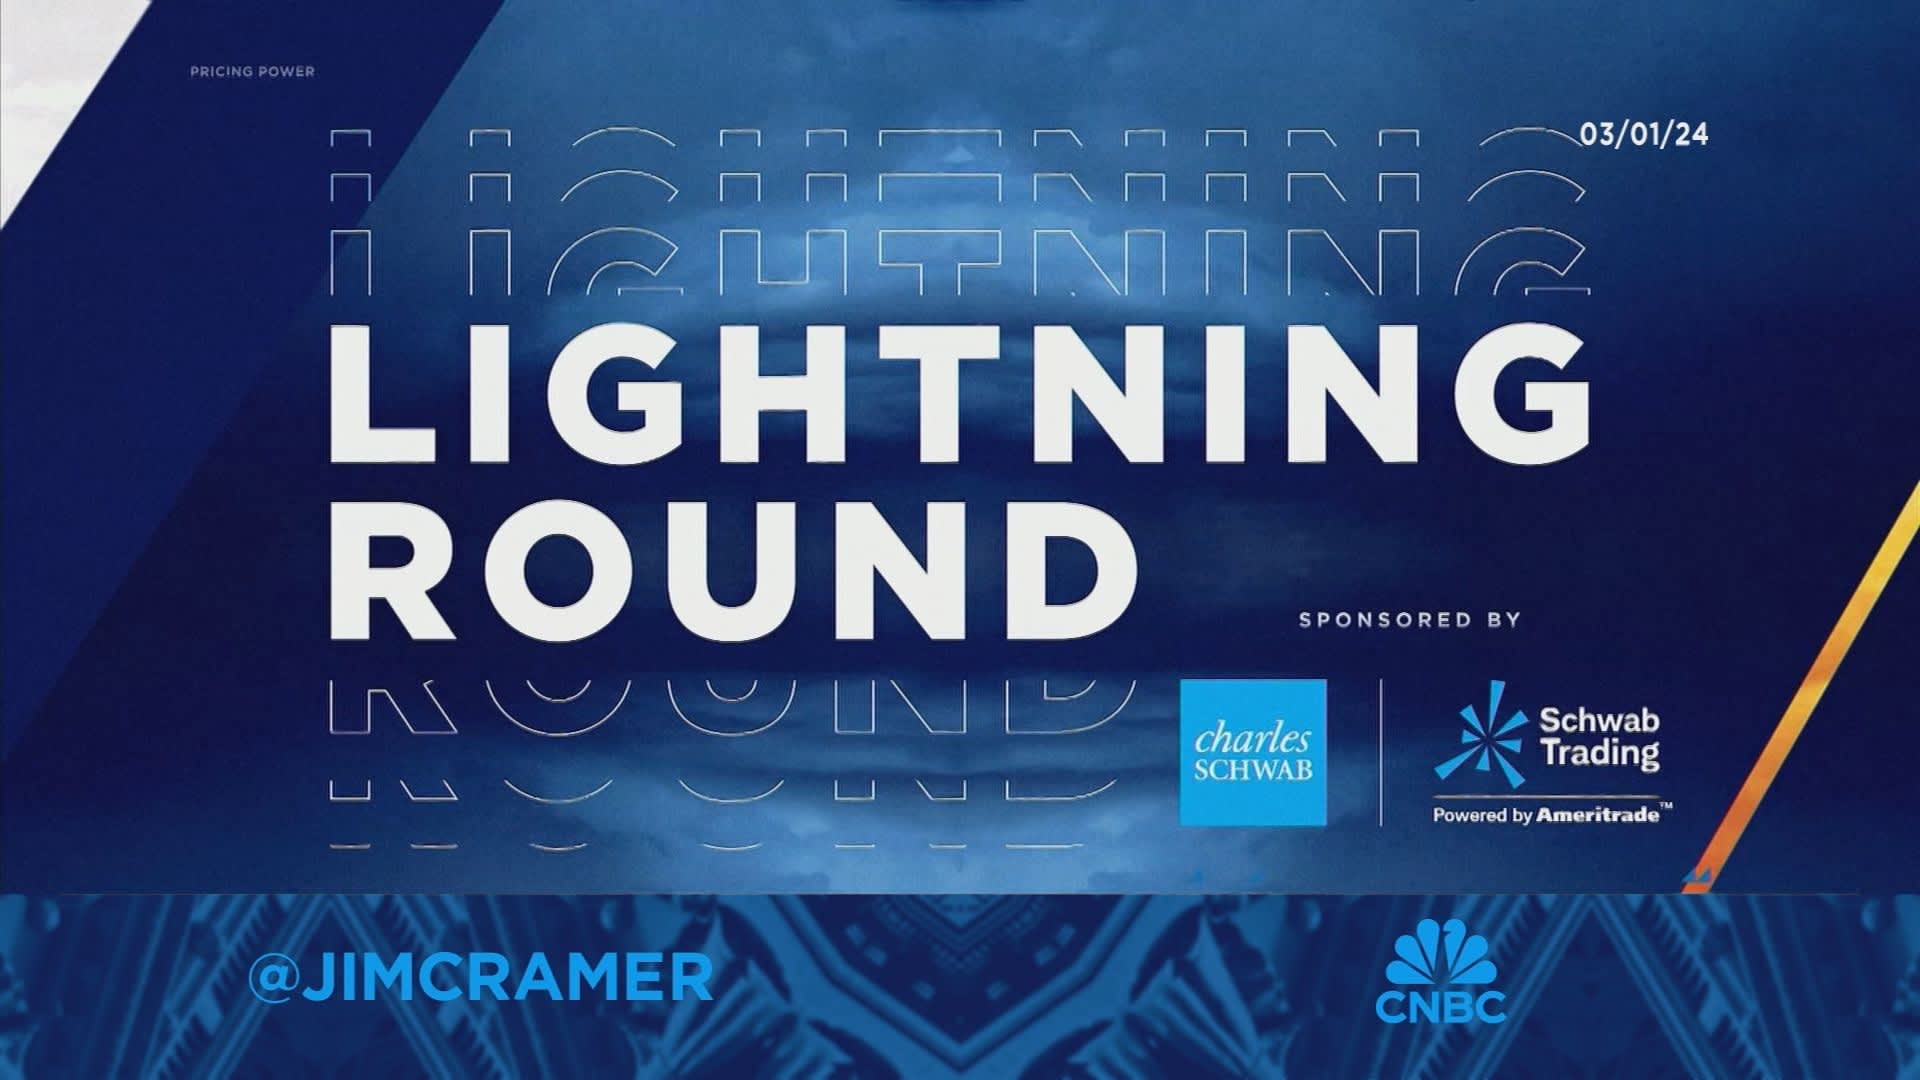 Lightning Round: The forces of improvment are weighing on Roku, says Jim Cramer